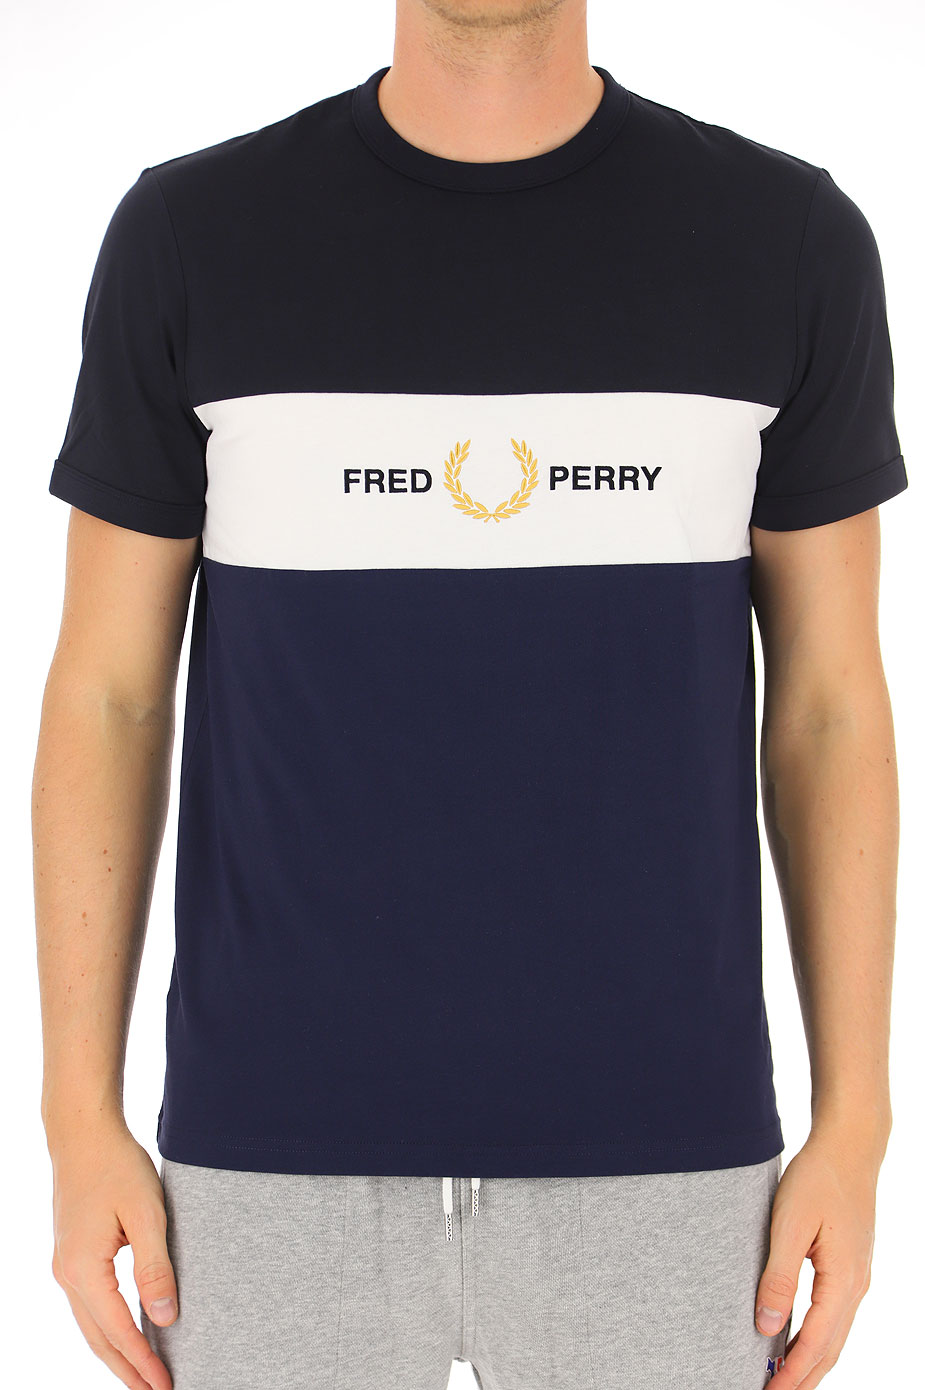 Mens Clothing Fred Perry, Style code: m8530-266-